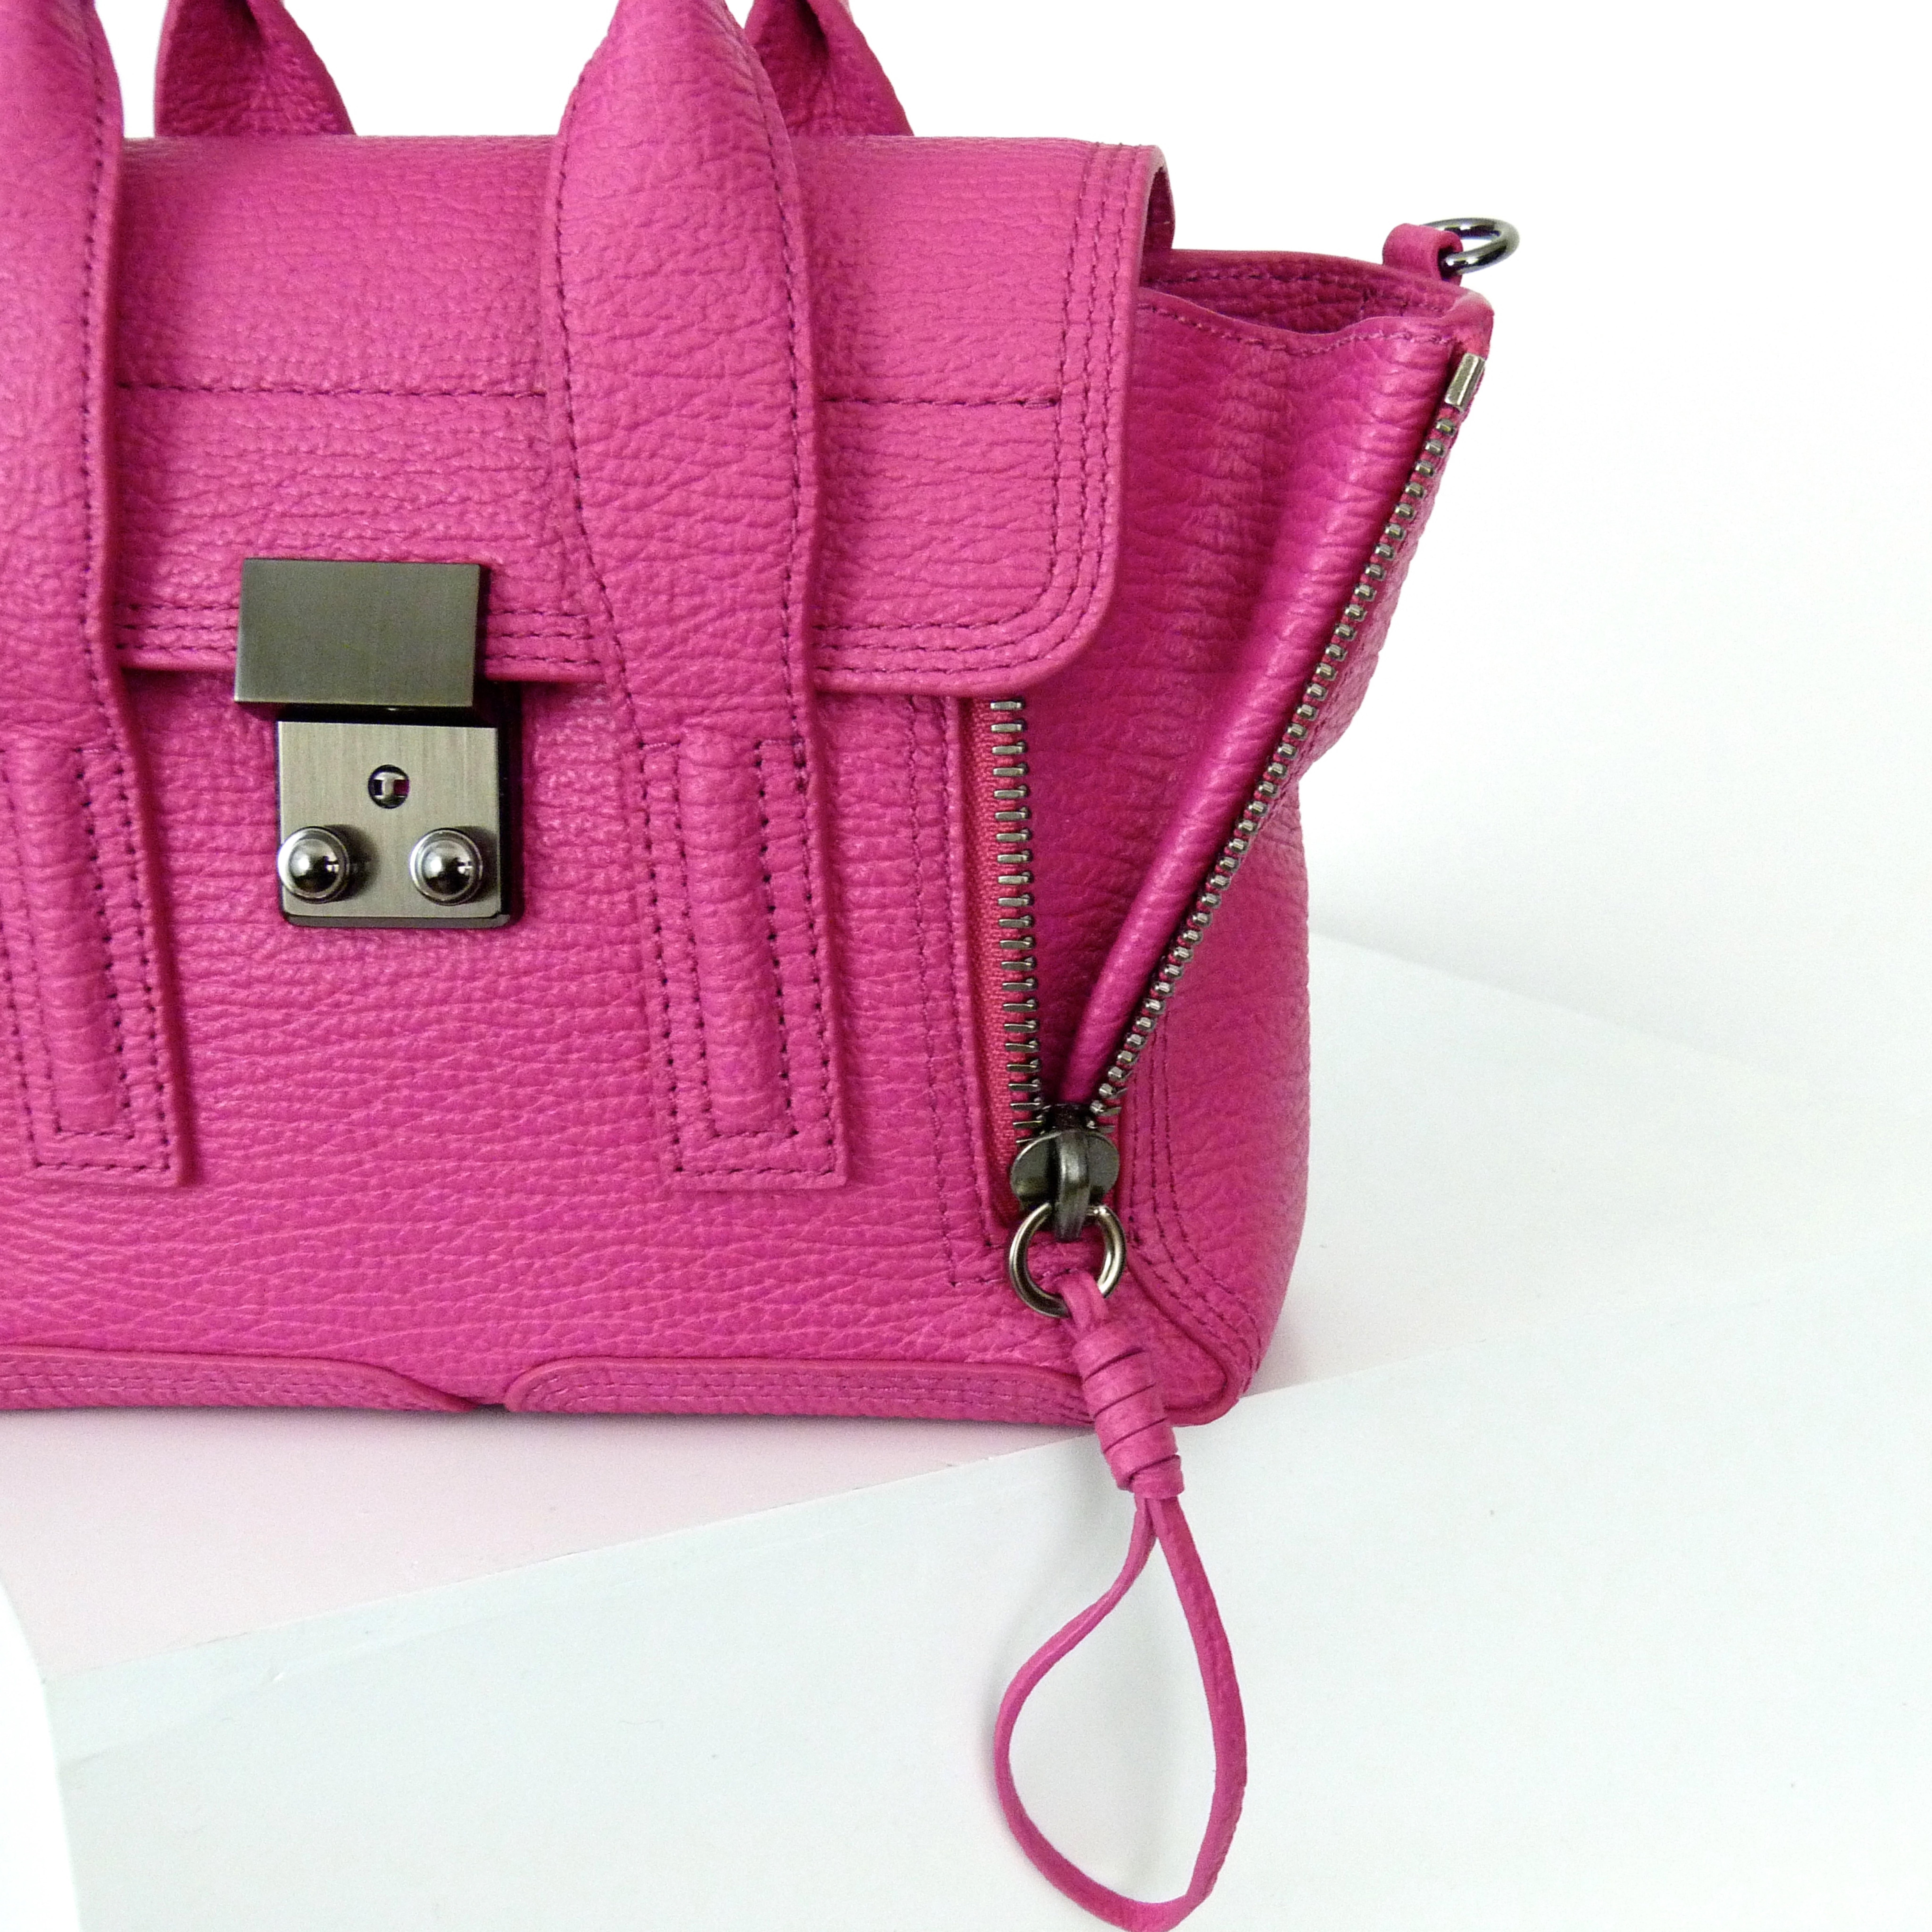 3.1 Phillip Lim Pashli Mini Satchel is a stand out accessory in this fuchsia pink colour. Crafted in rich textured leather in soft hued tones and tonal stitching, is a small but mighty iconic Philip Lim bag.
The bag has a detachable shoulder strap,